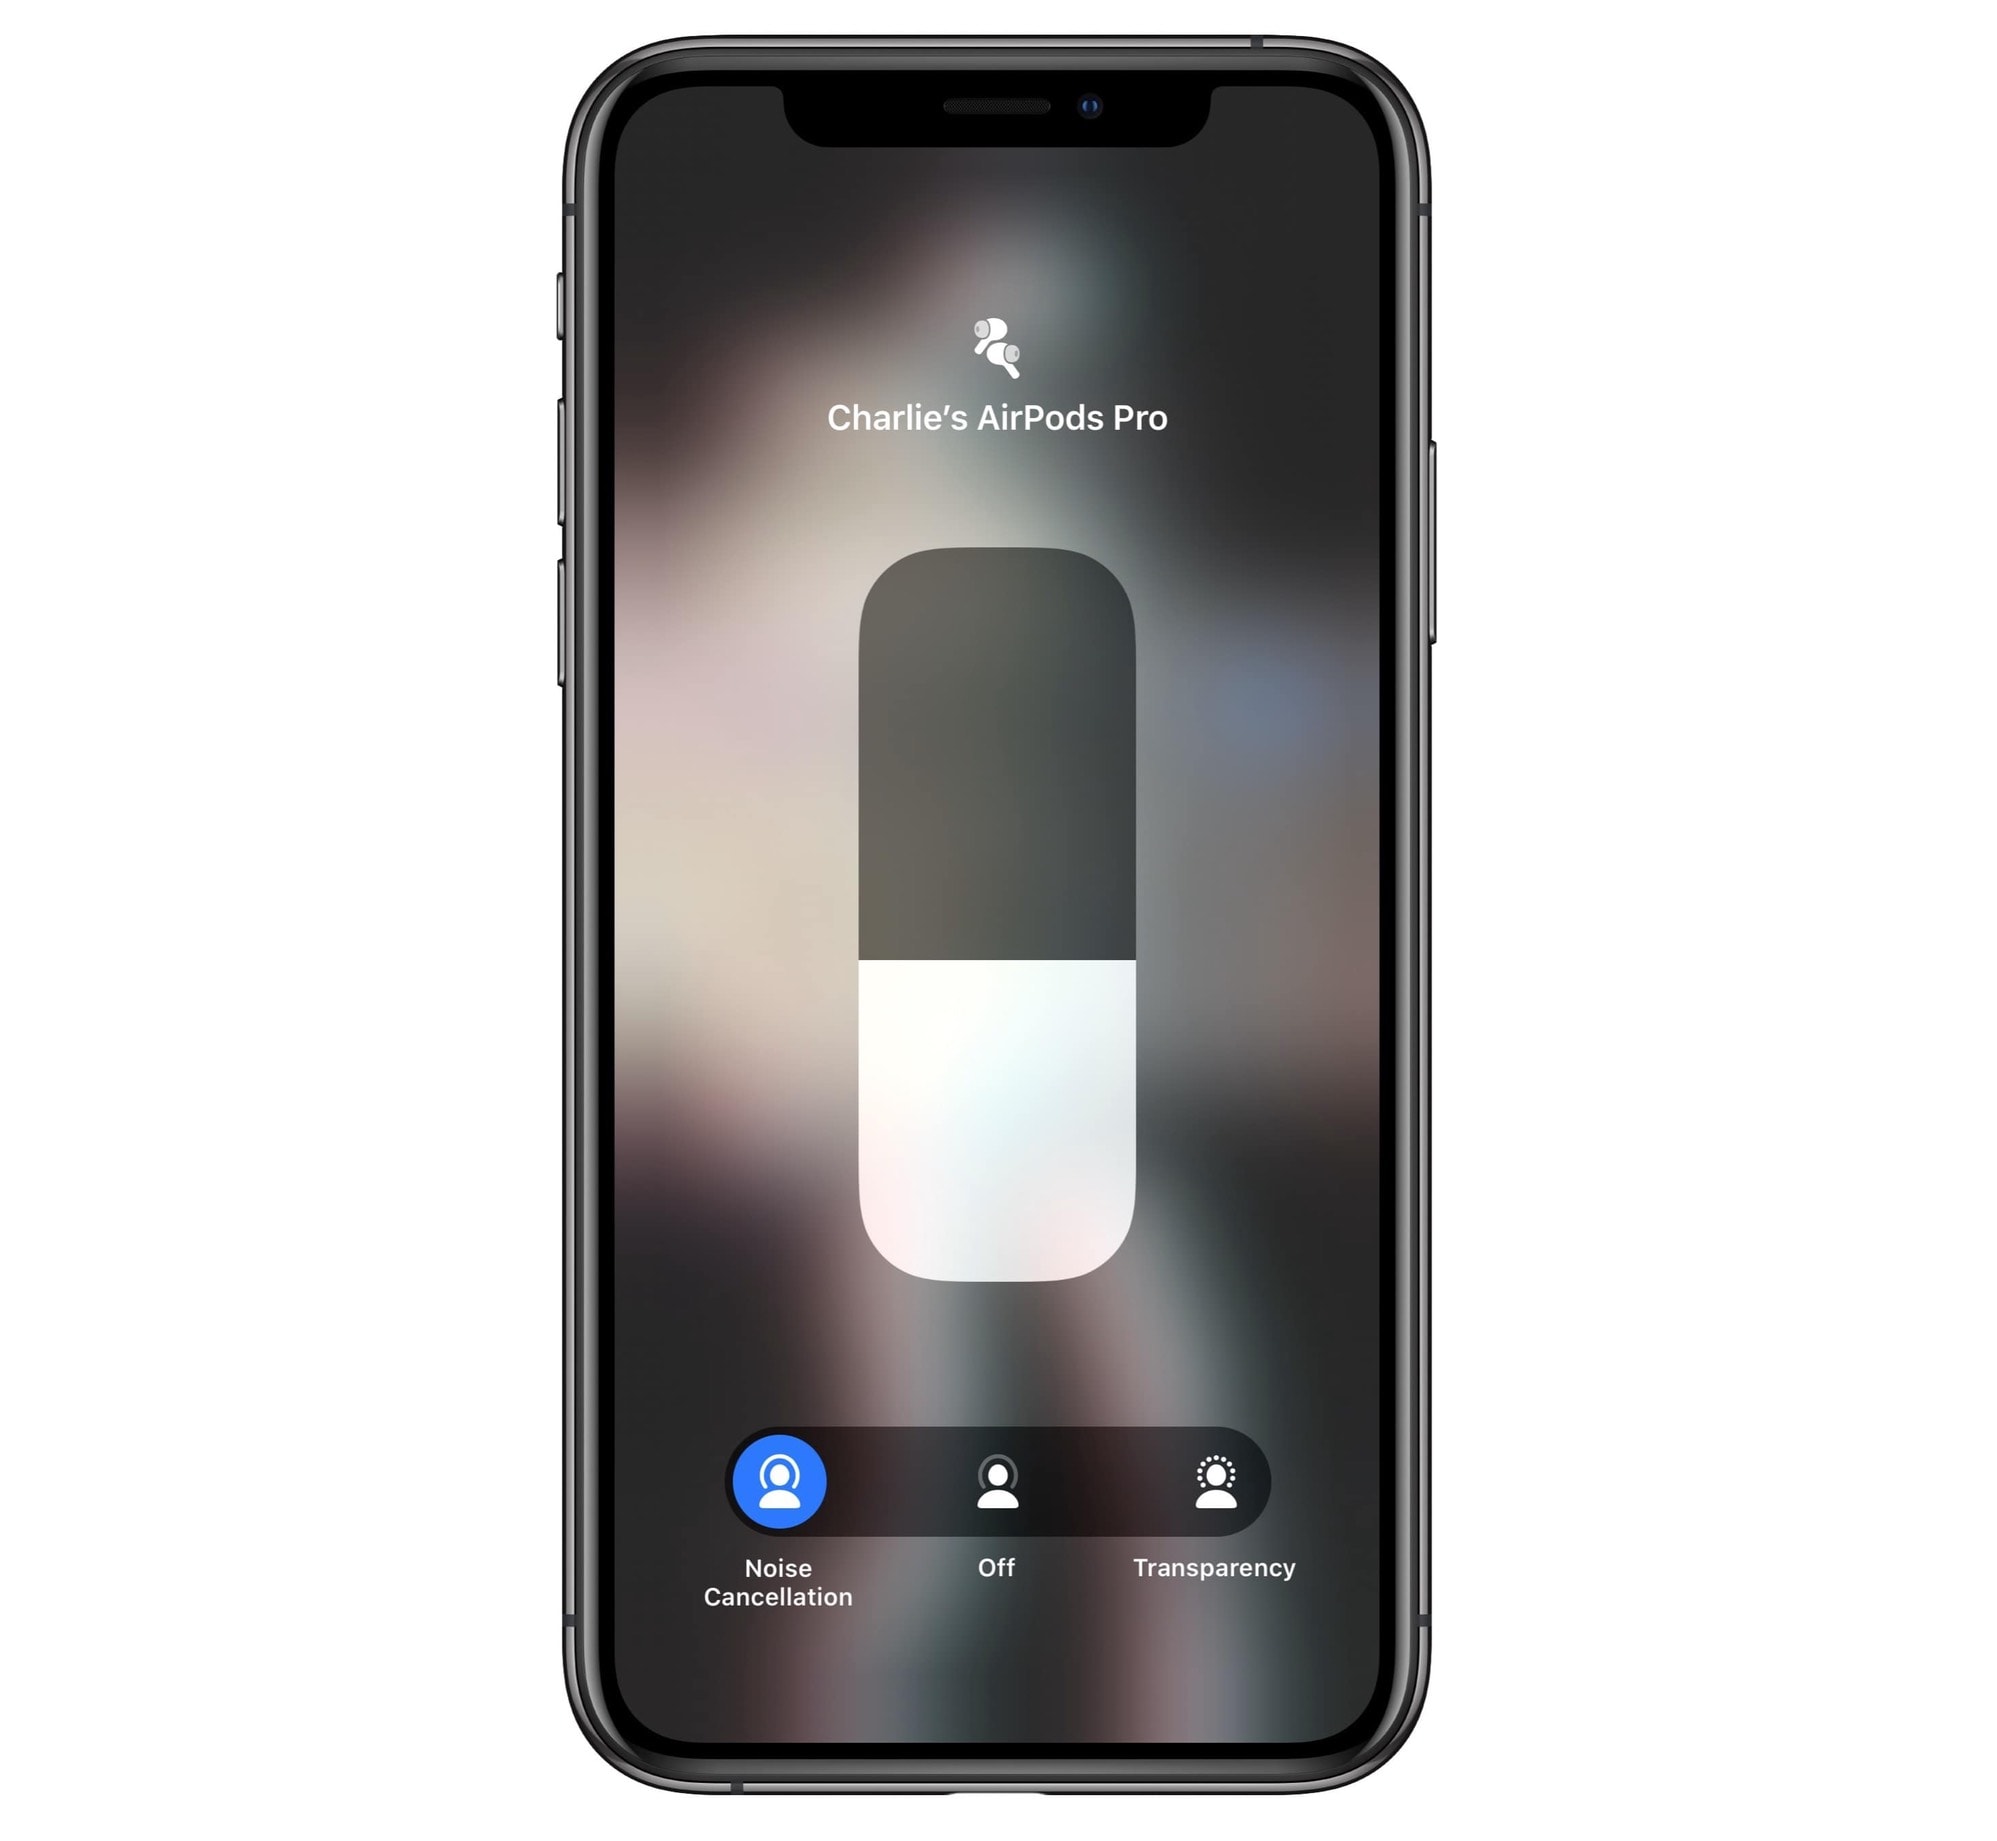 Long-press the AirPods Pro volume icon in Control Center.